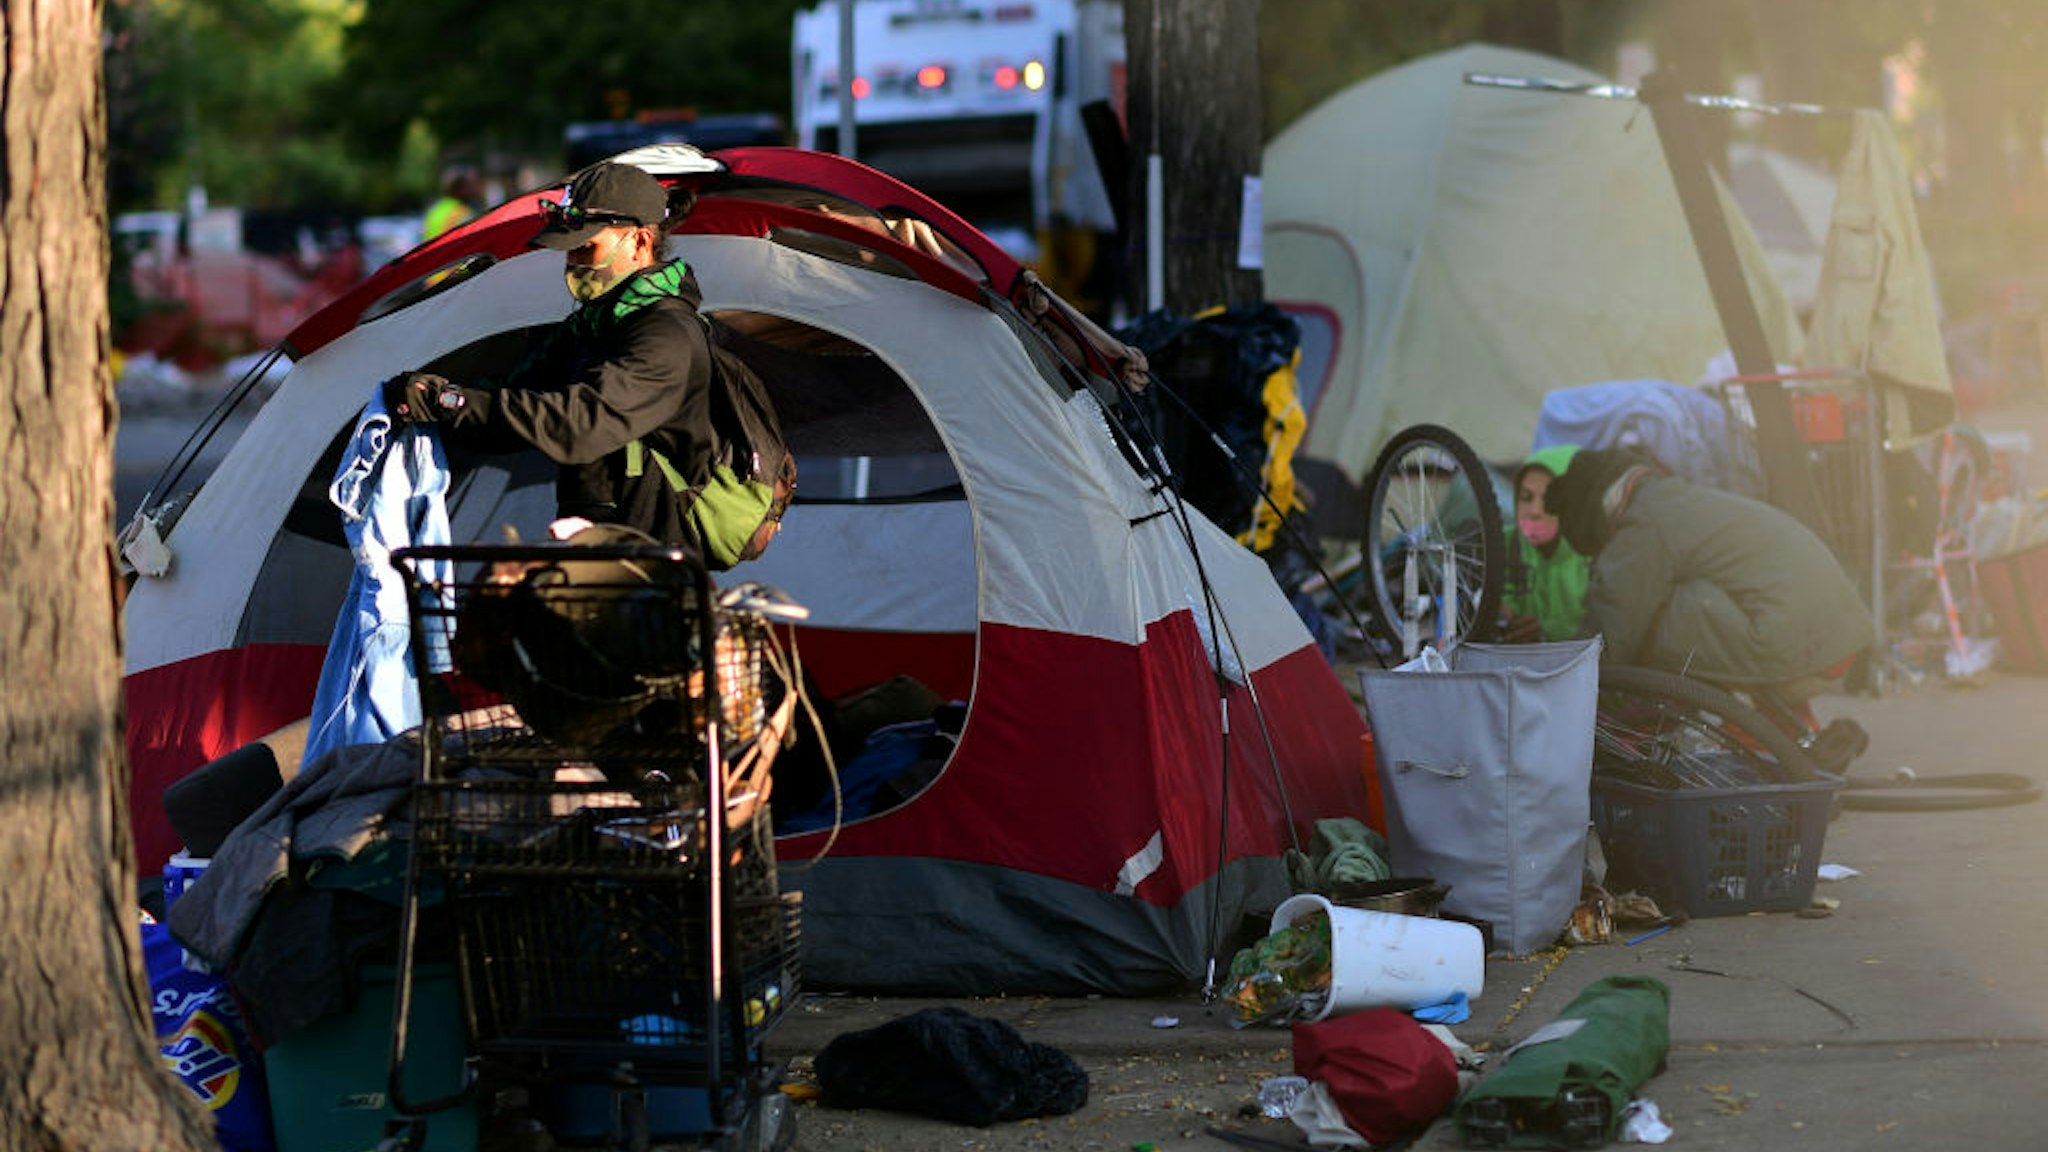 DENVER, CO - OCTOBER 6 : People start packing their belongings near the intersection of 13th Ave. and Logan St. in Denver, Colorado on Tuesday. October 6, 2020. Denver city crews swept the tents of encampment site. (Photo by Hyoung Chang/MediaNews Group/The Denver Post via Getty Images)